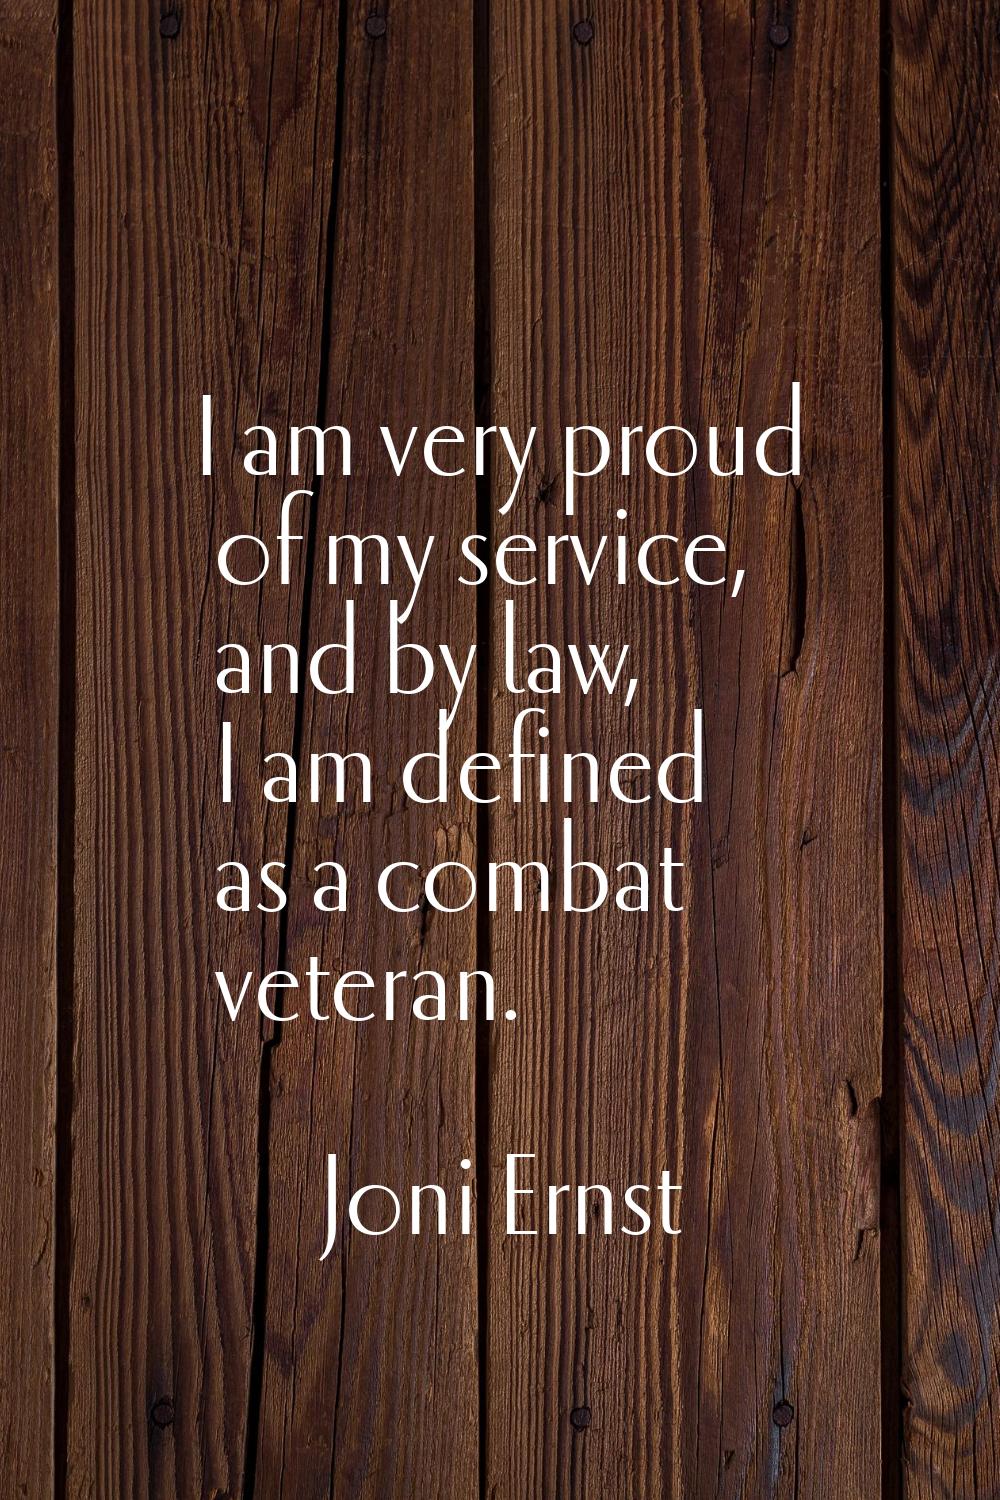 I am very proud of my service, and by law, I am defined as a combat veteran.